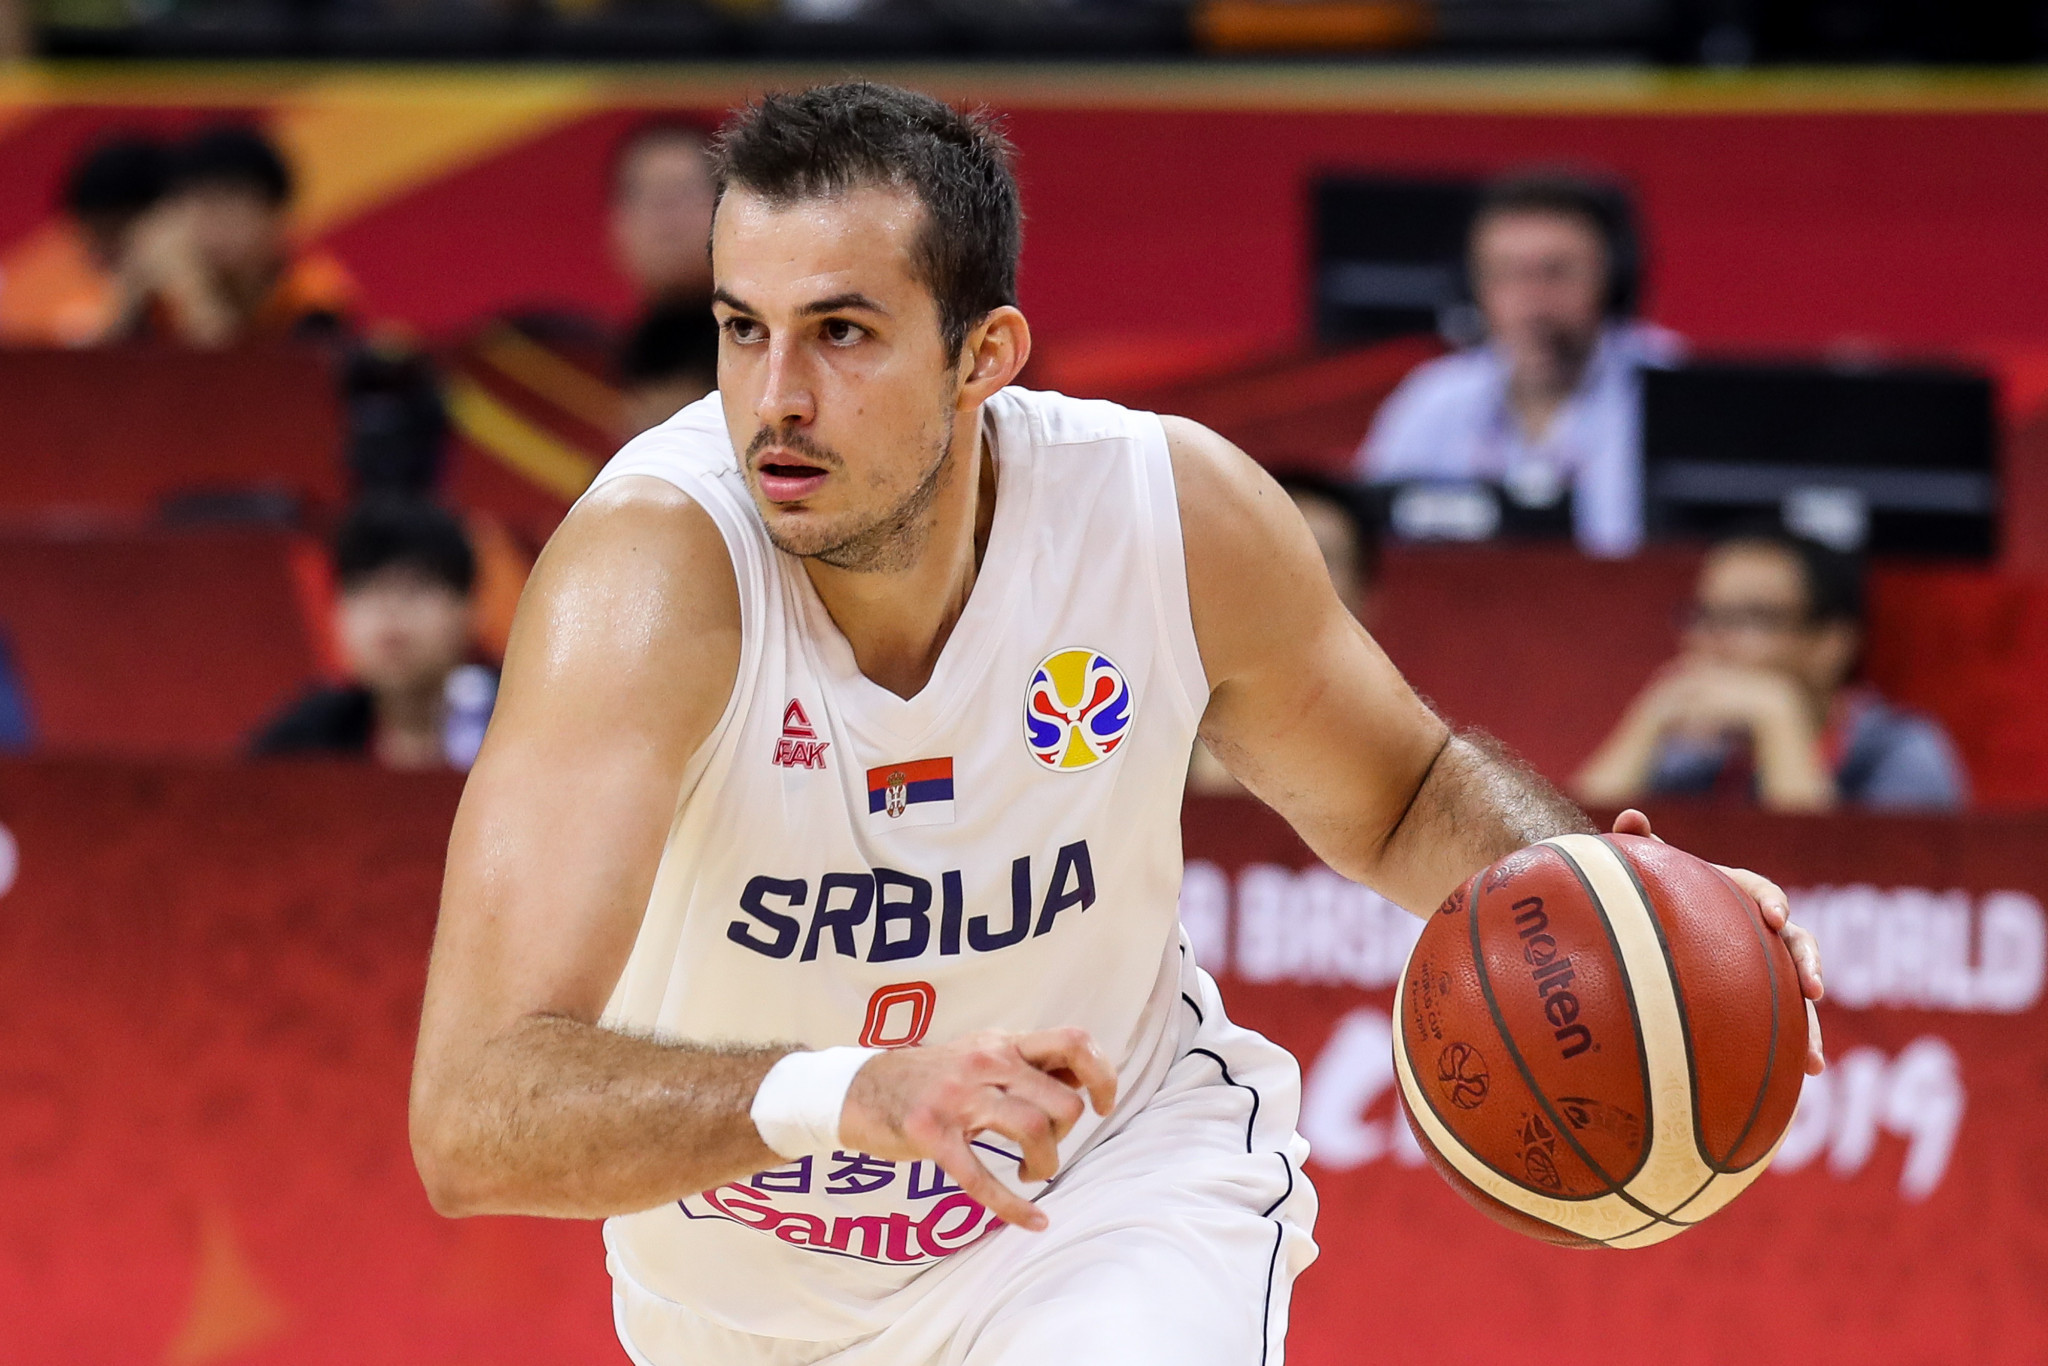 Serbian basketball star Nemanja Bjelica has targeted bouncing back from injury disappointment to finally appear at the Olympic Games ©Getty Images